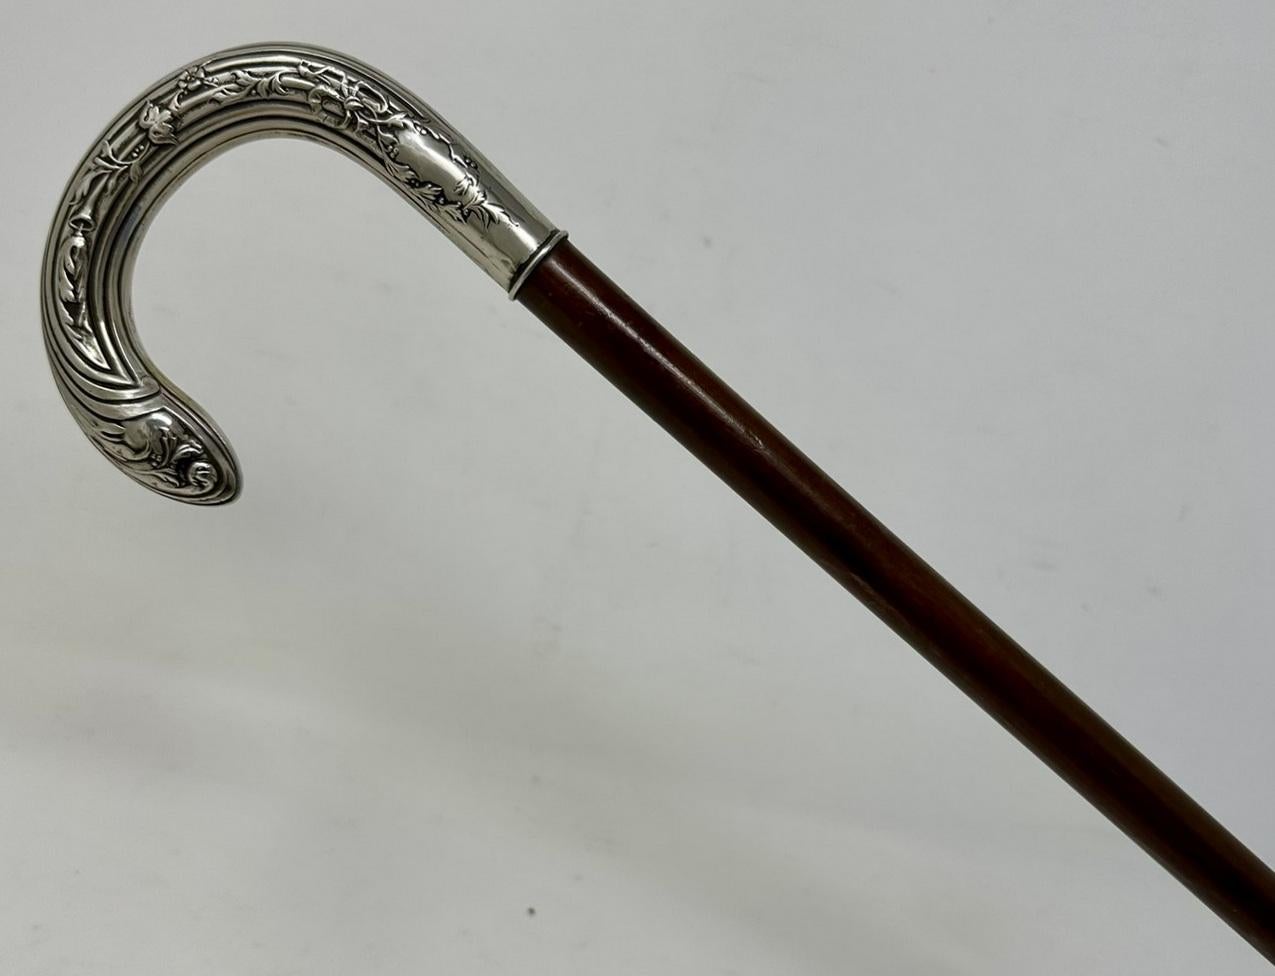 Stylish Solid Polished Dark Malacca Wood and Sterling Silver Lady’s or Gentleman’s Walking Stick with Traditional ornately cast Crook shaped handle in Art Nouveau style, of French or English origin, complete with its original bi-metal polished